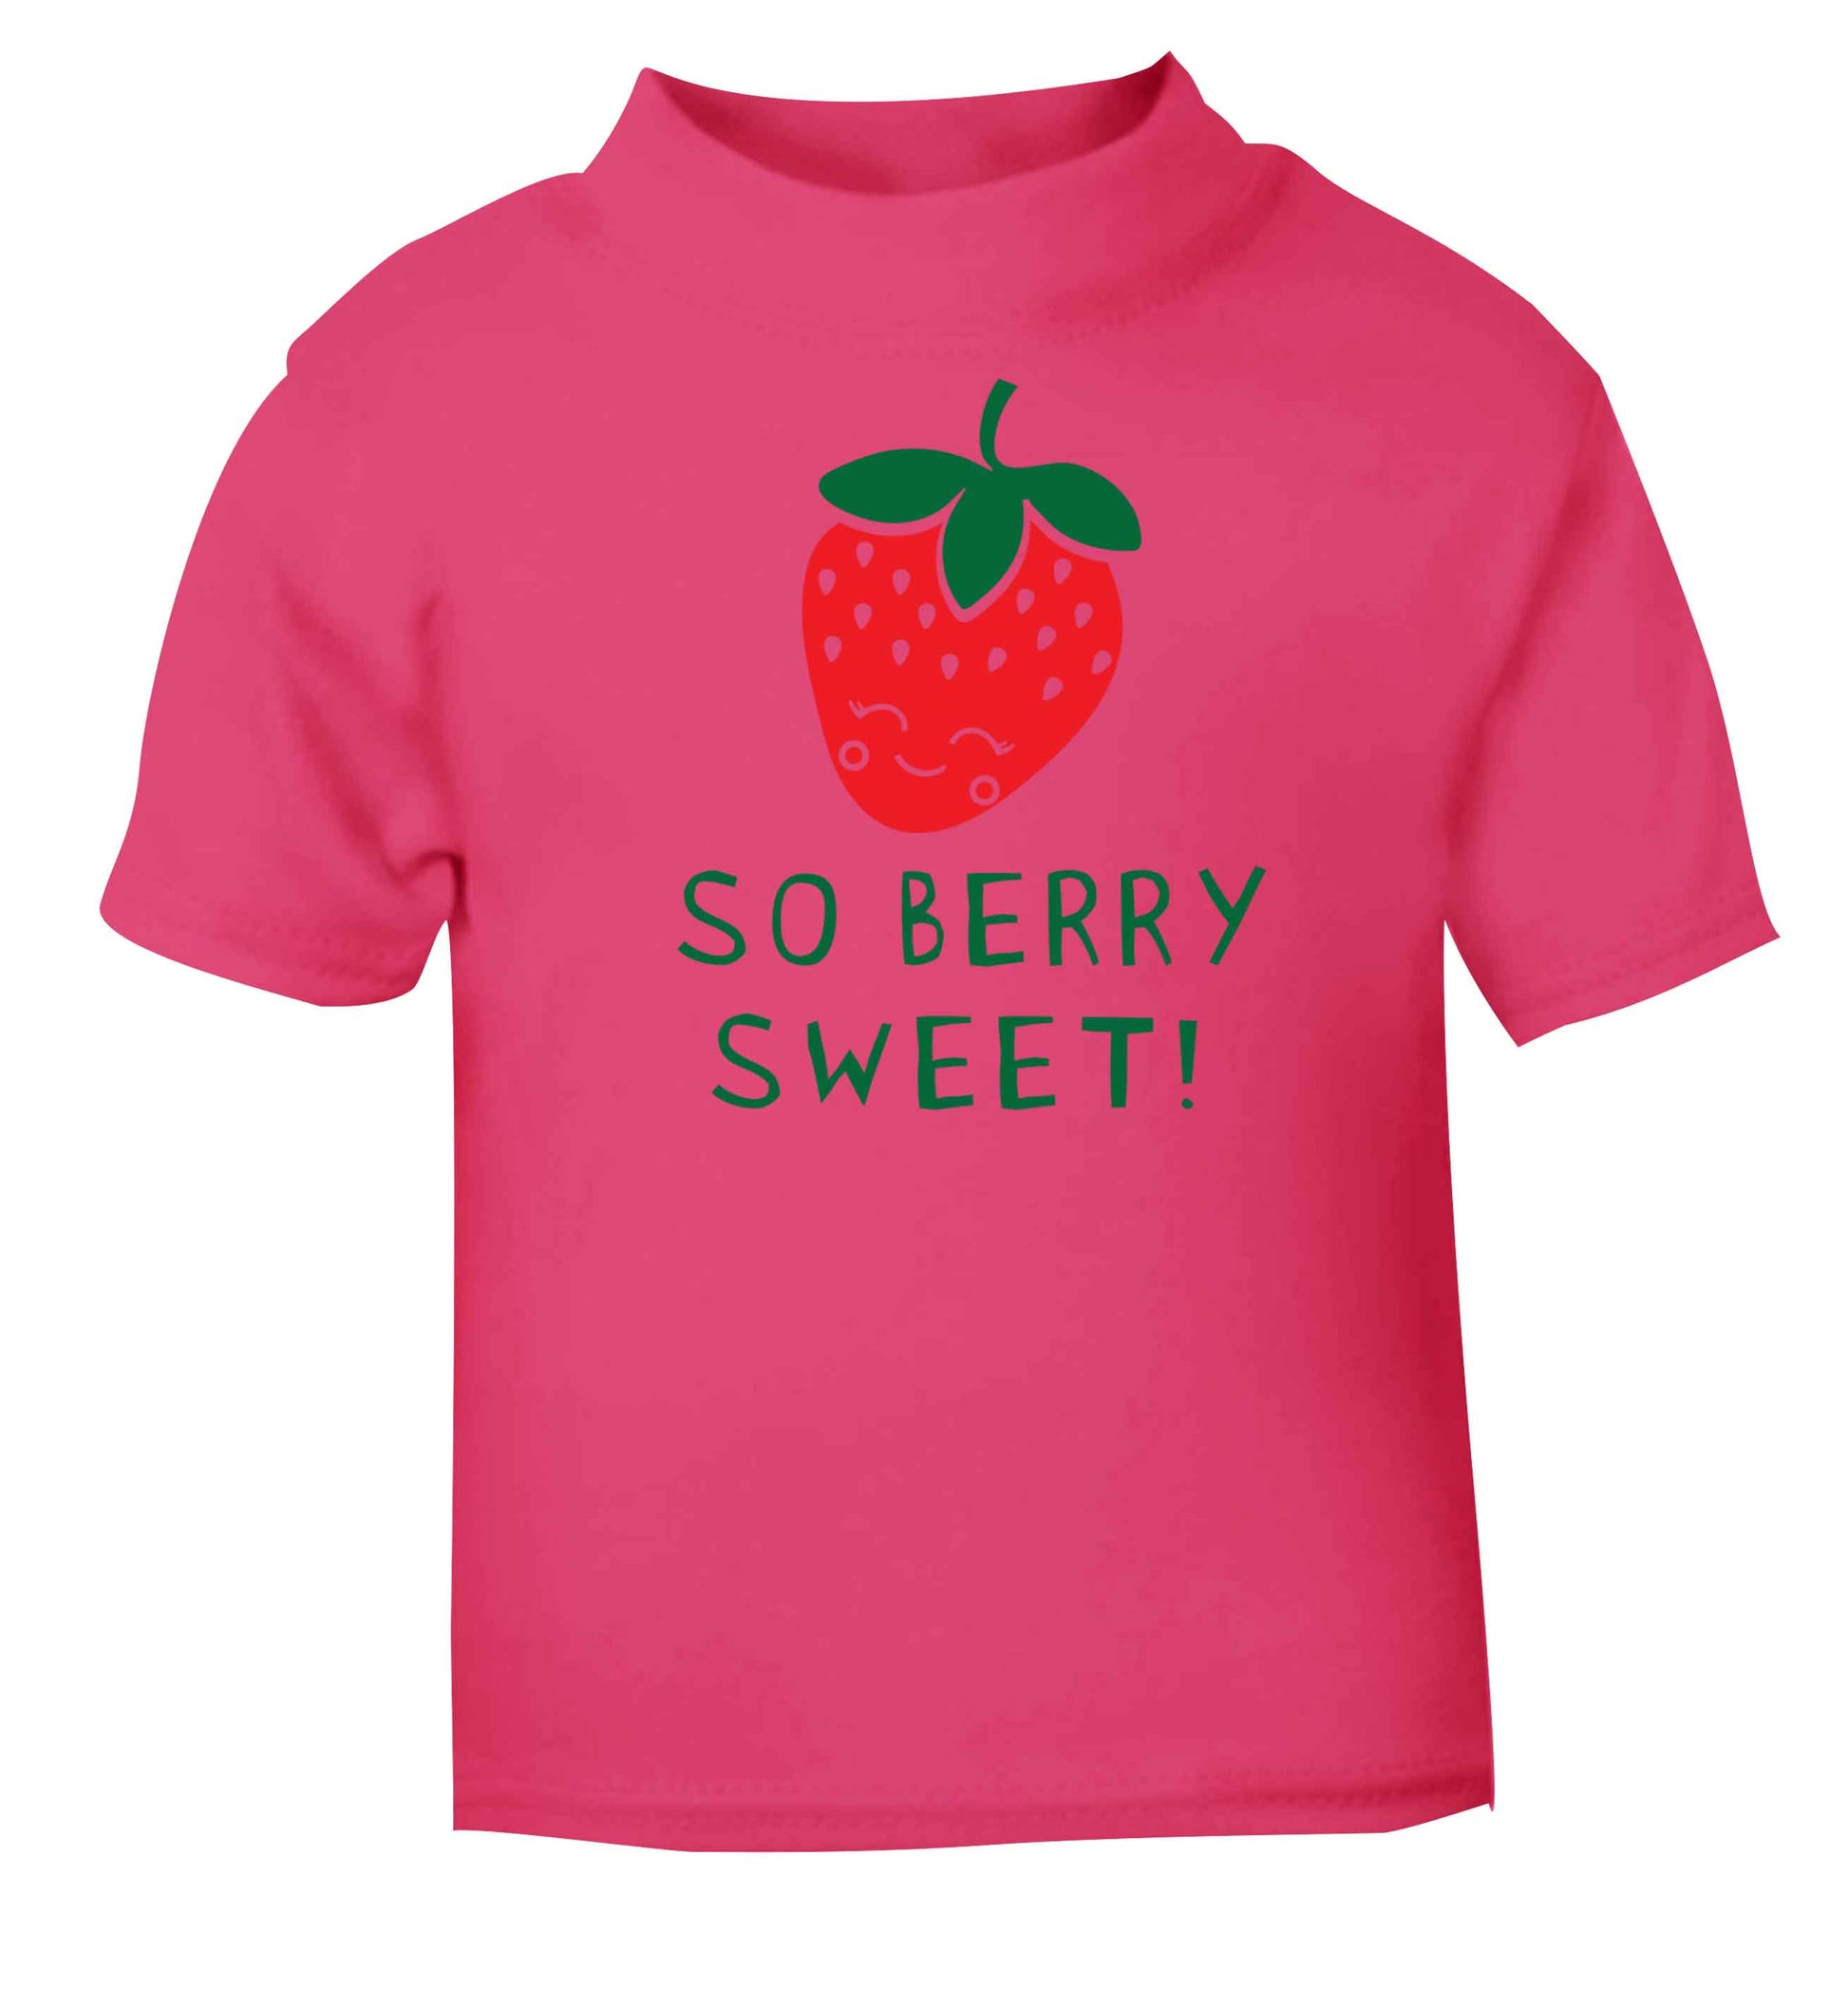 So berry sweet pink baby toddler Tshirt 2 Years